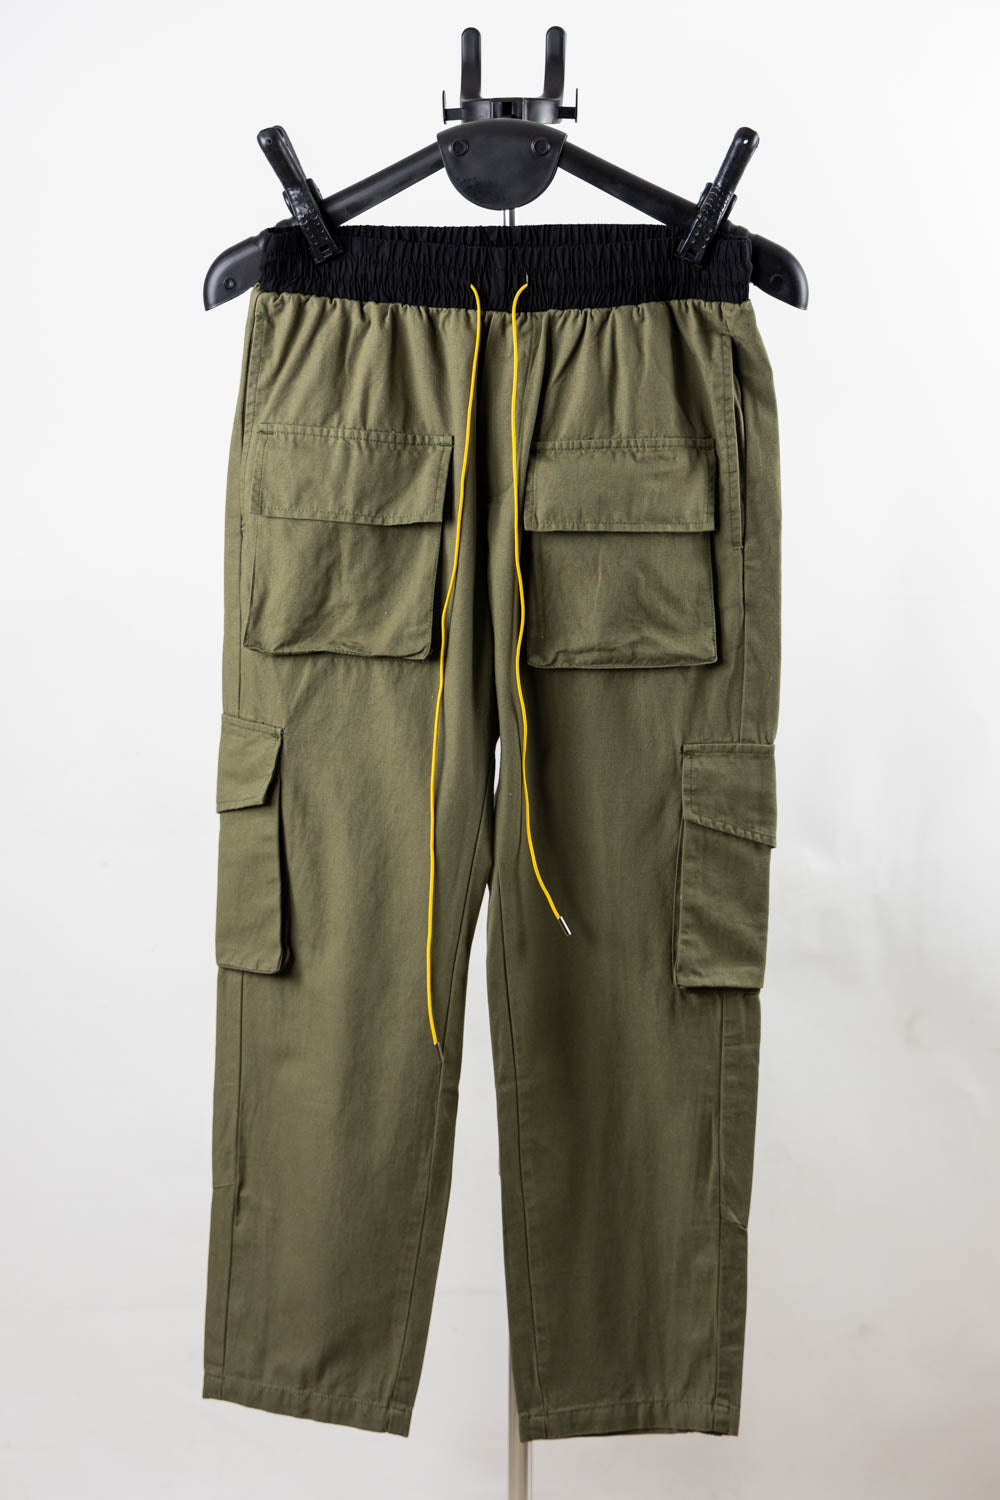 SNAP CARGO PANTS Olive